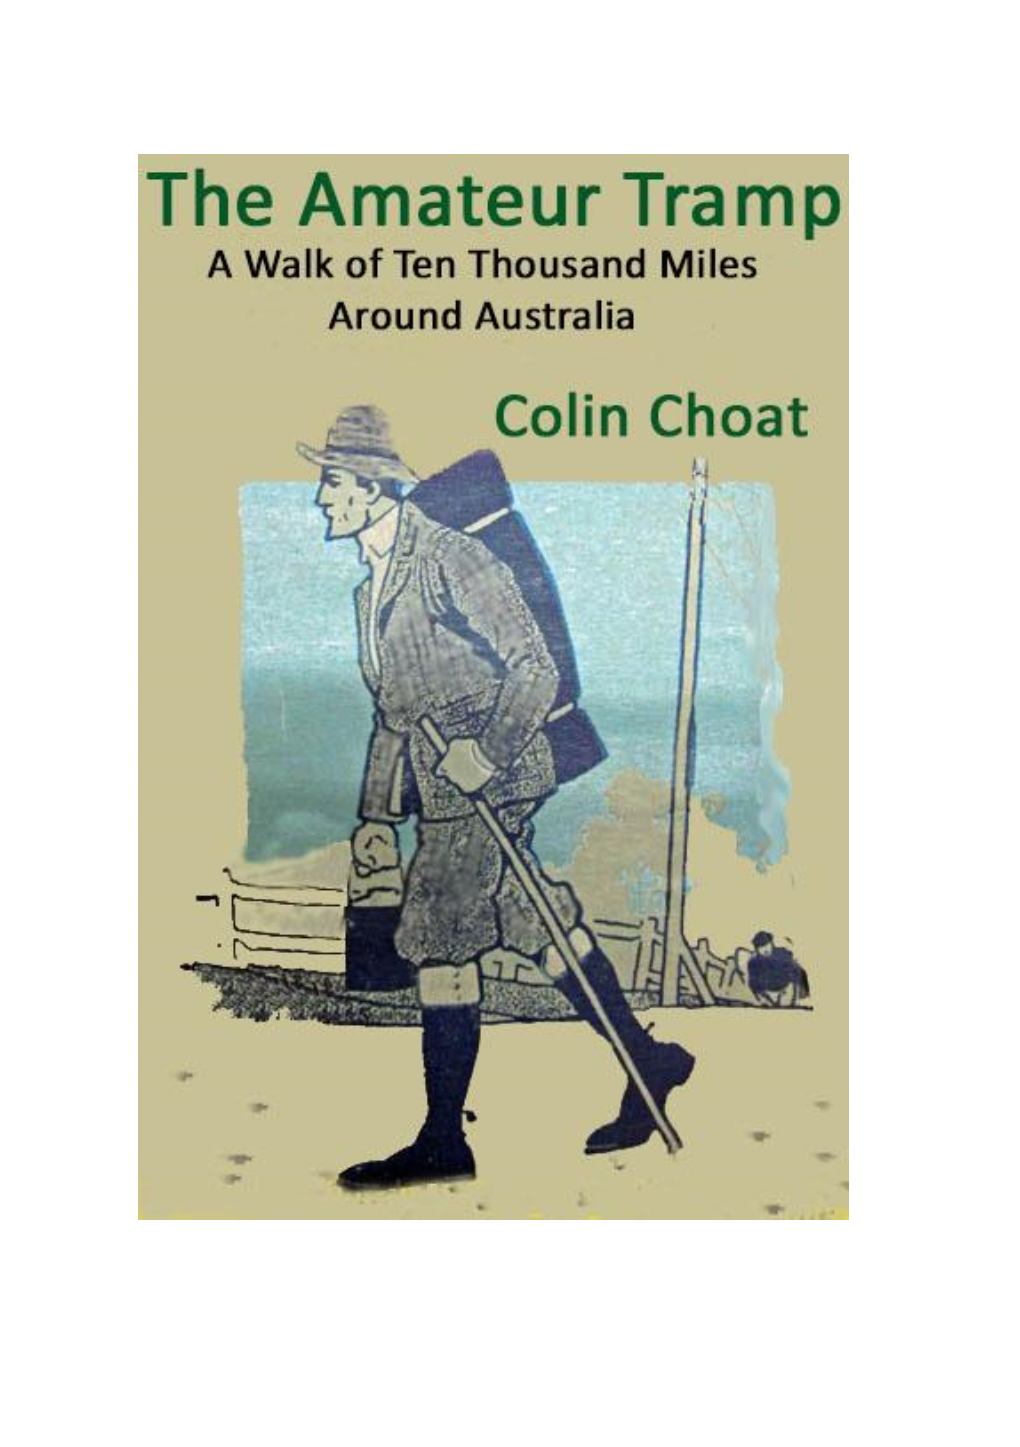 The Amateur Tramp by Colin Choat